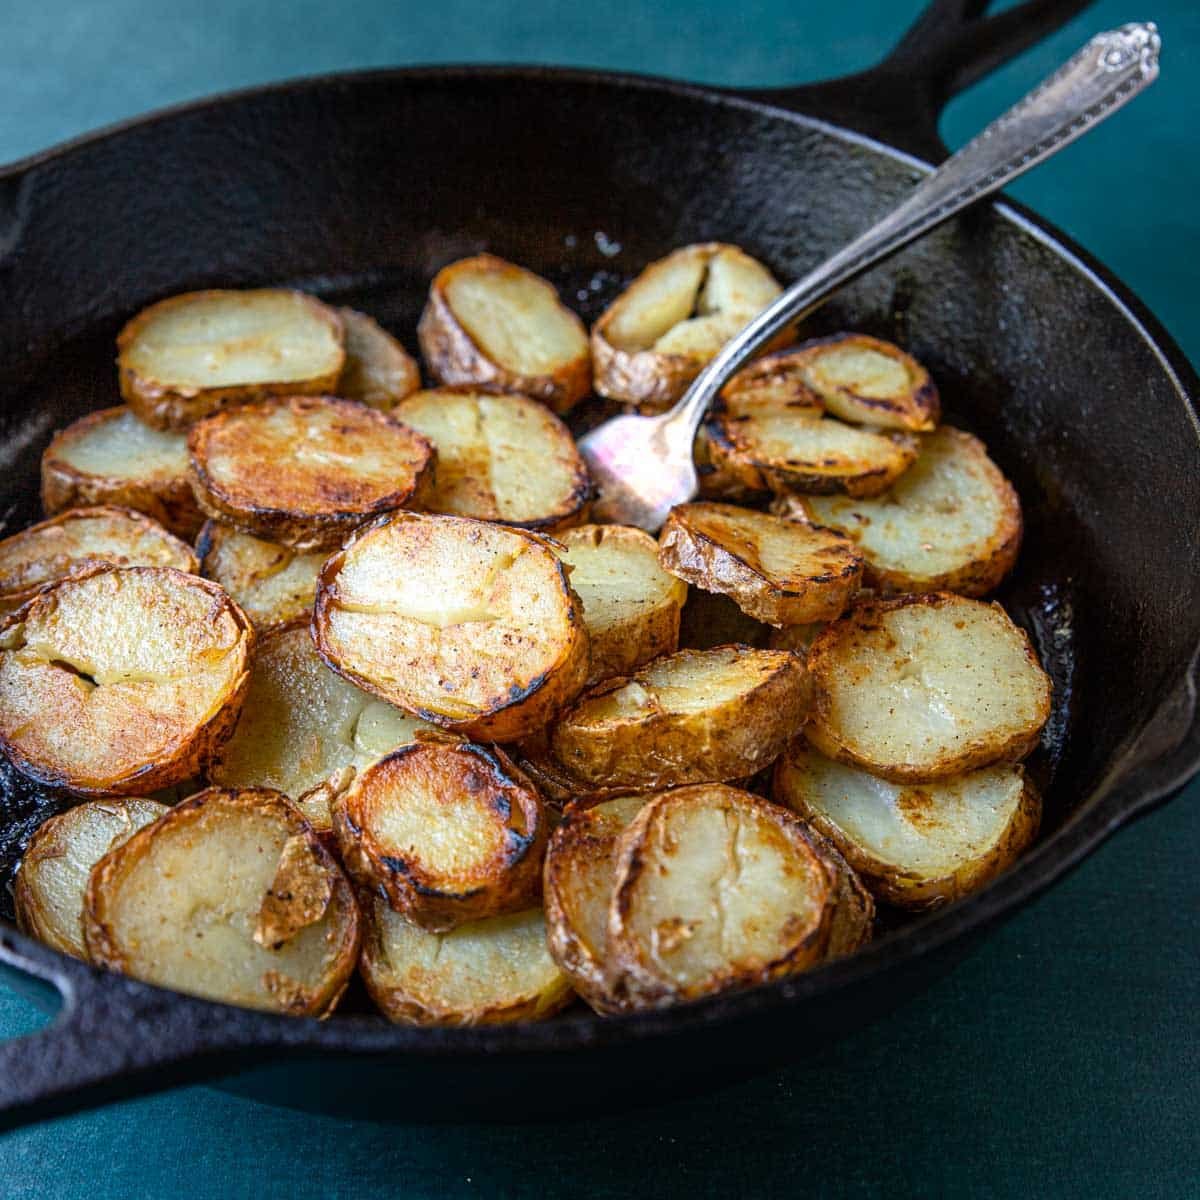 Leftover baked potatoes sliced and sauteed in a skillet